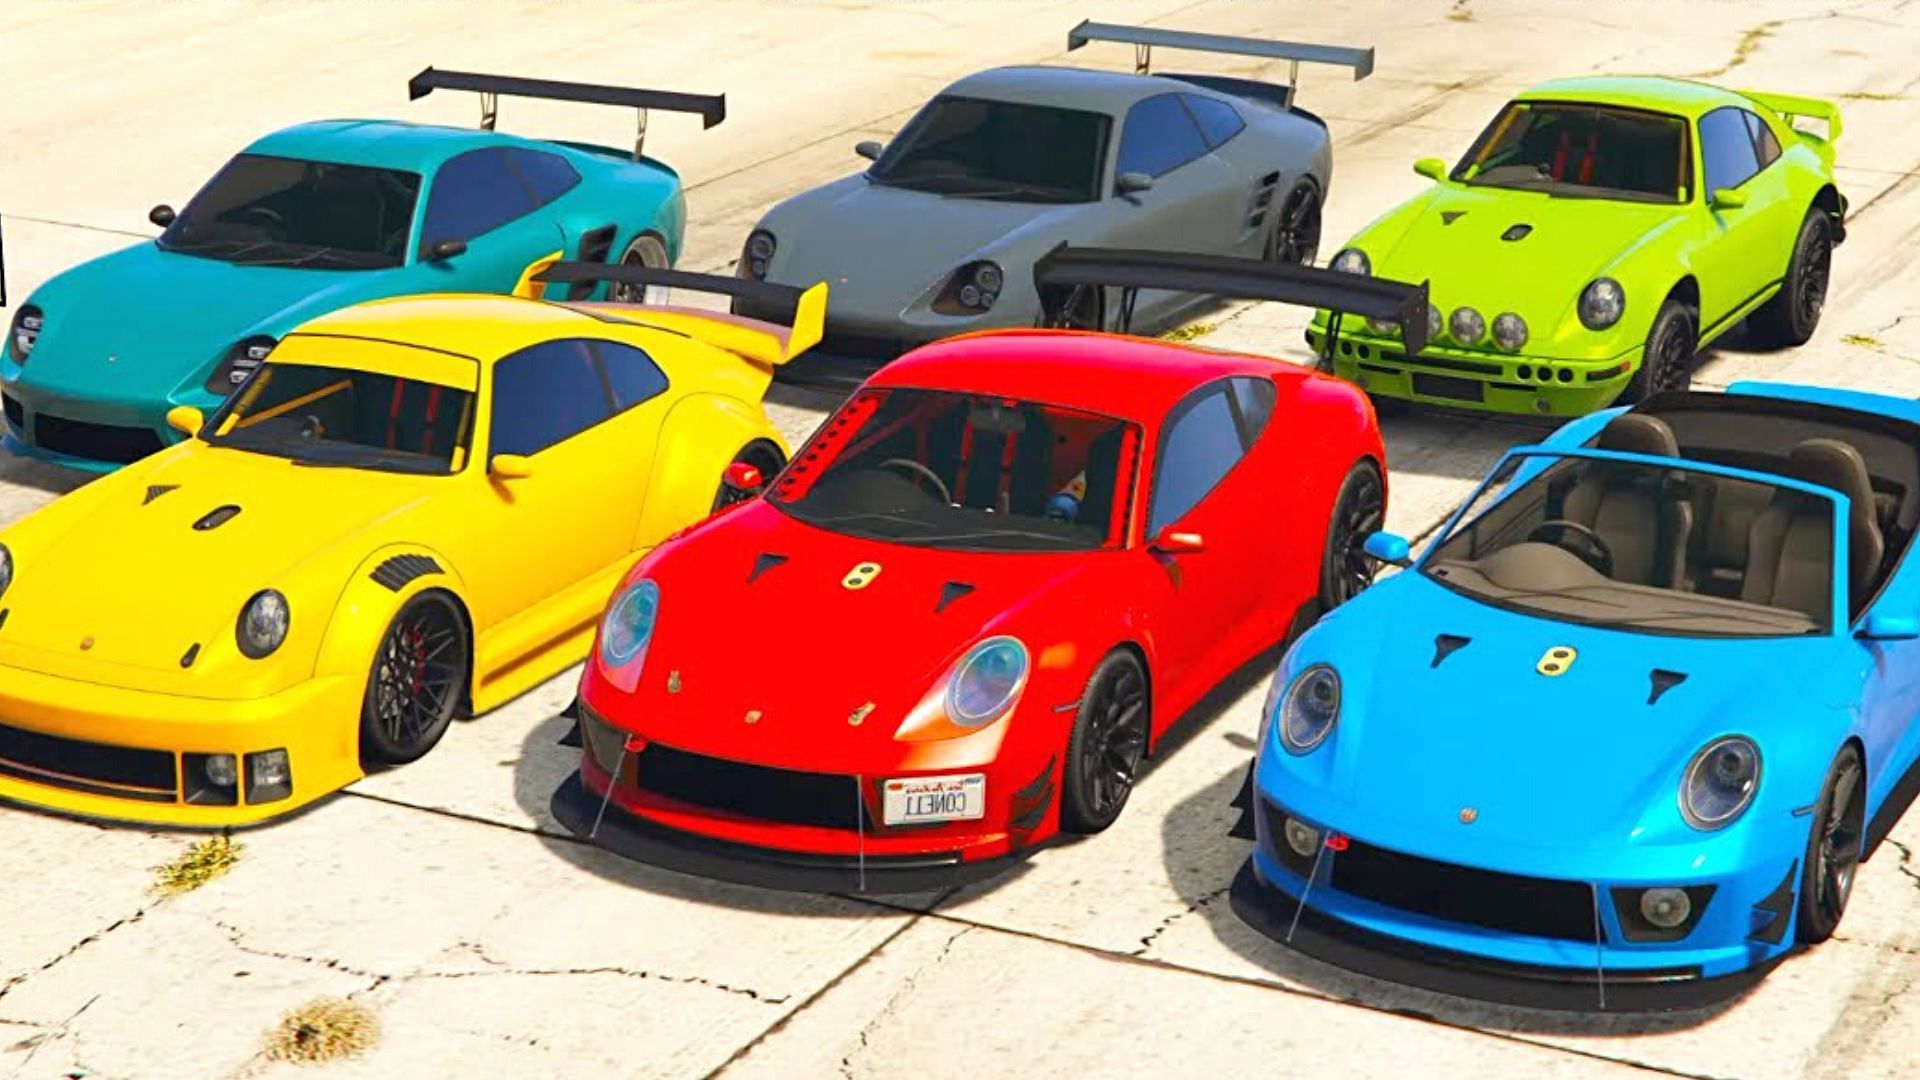 A list of all Pfister Comet vehicles available in GTA Online (Image via CONE 11 on YouTube)